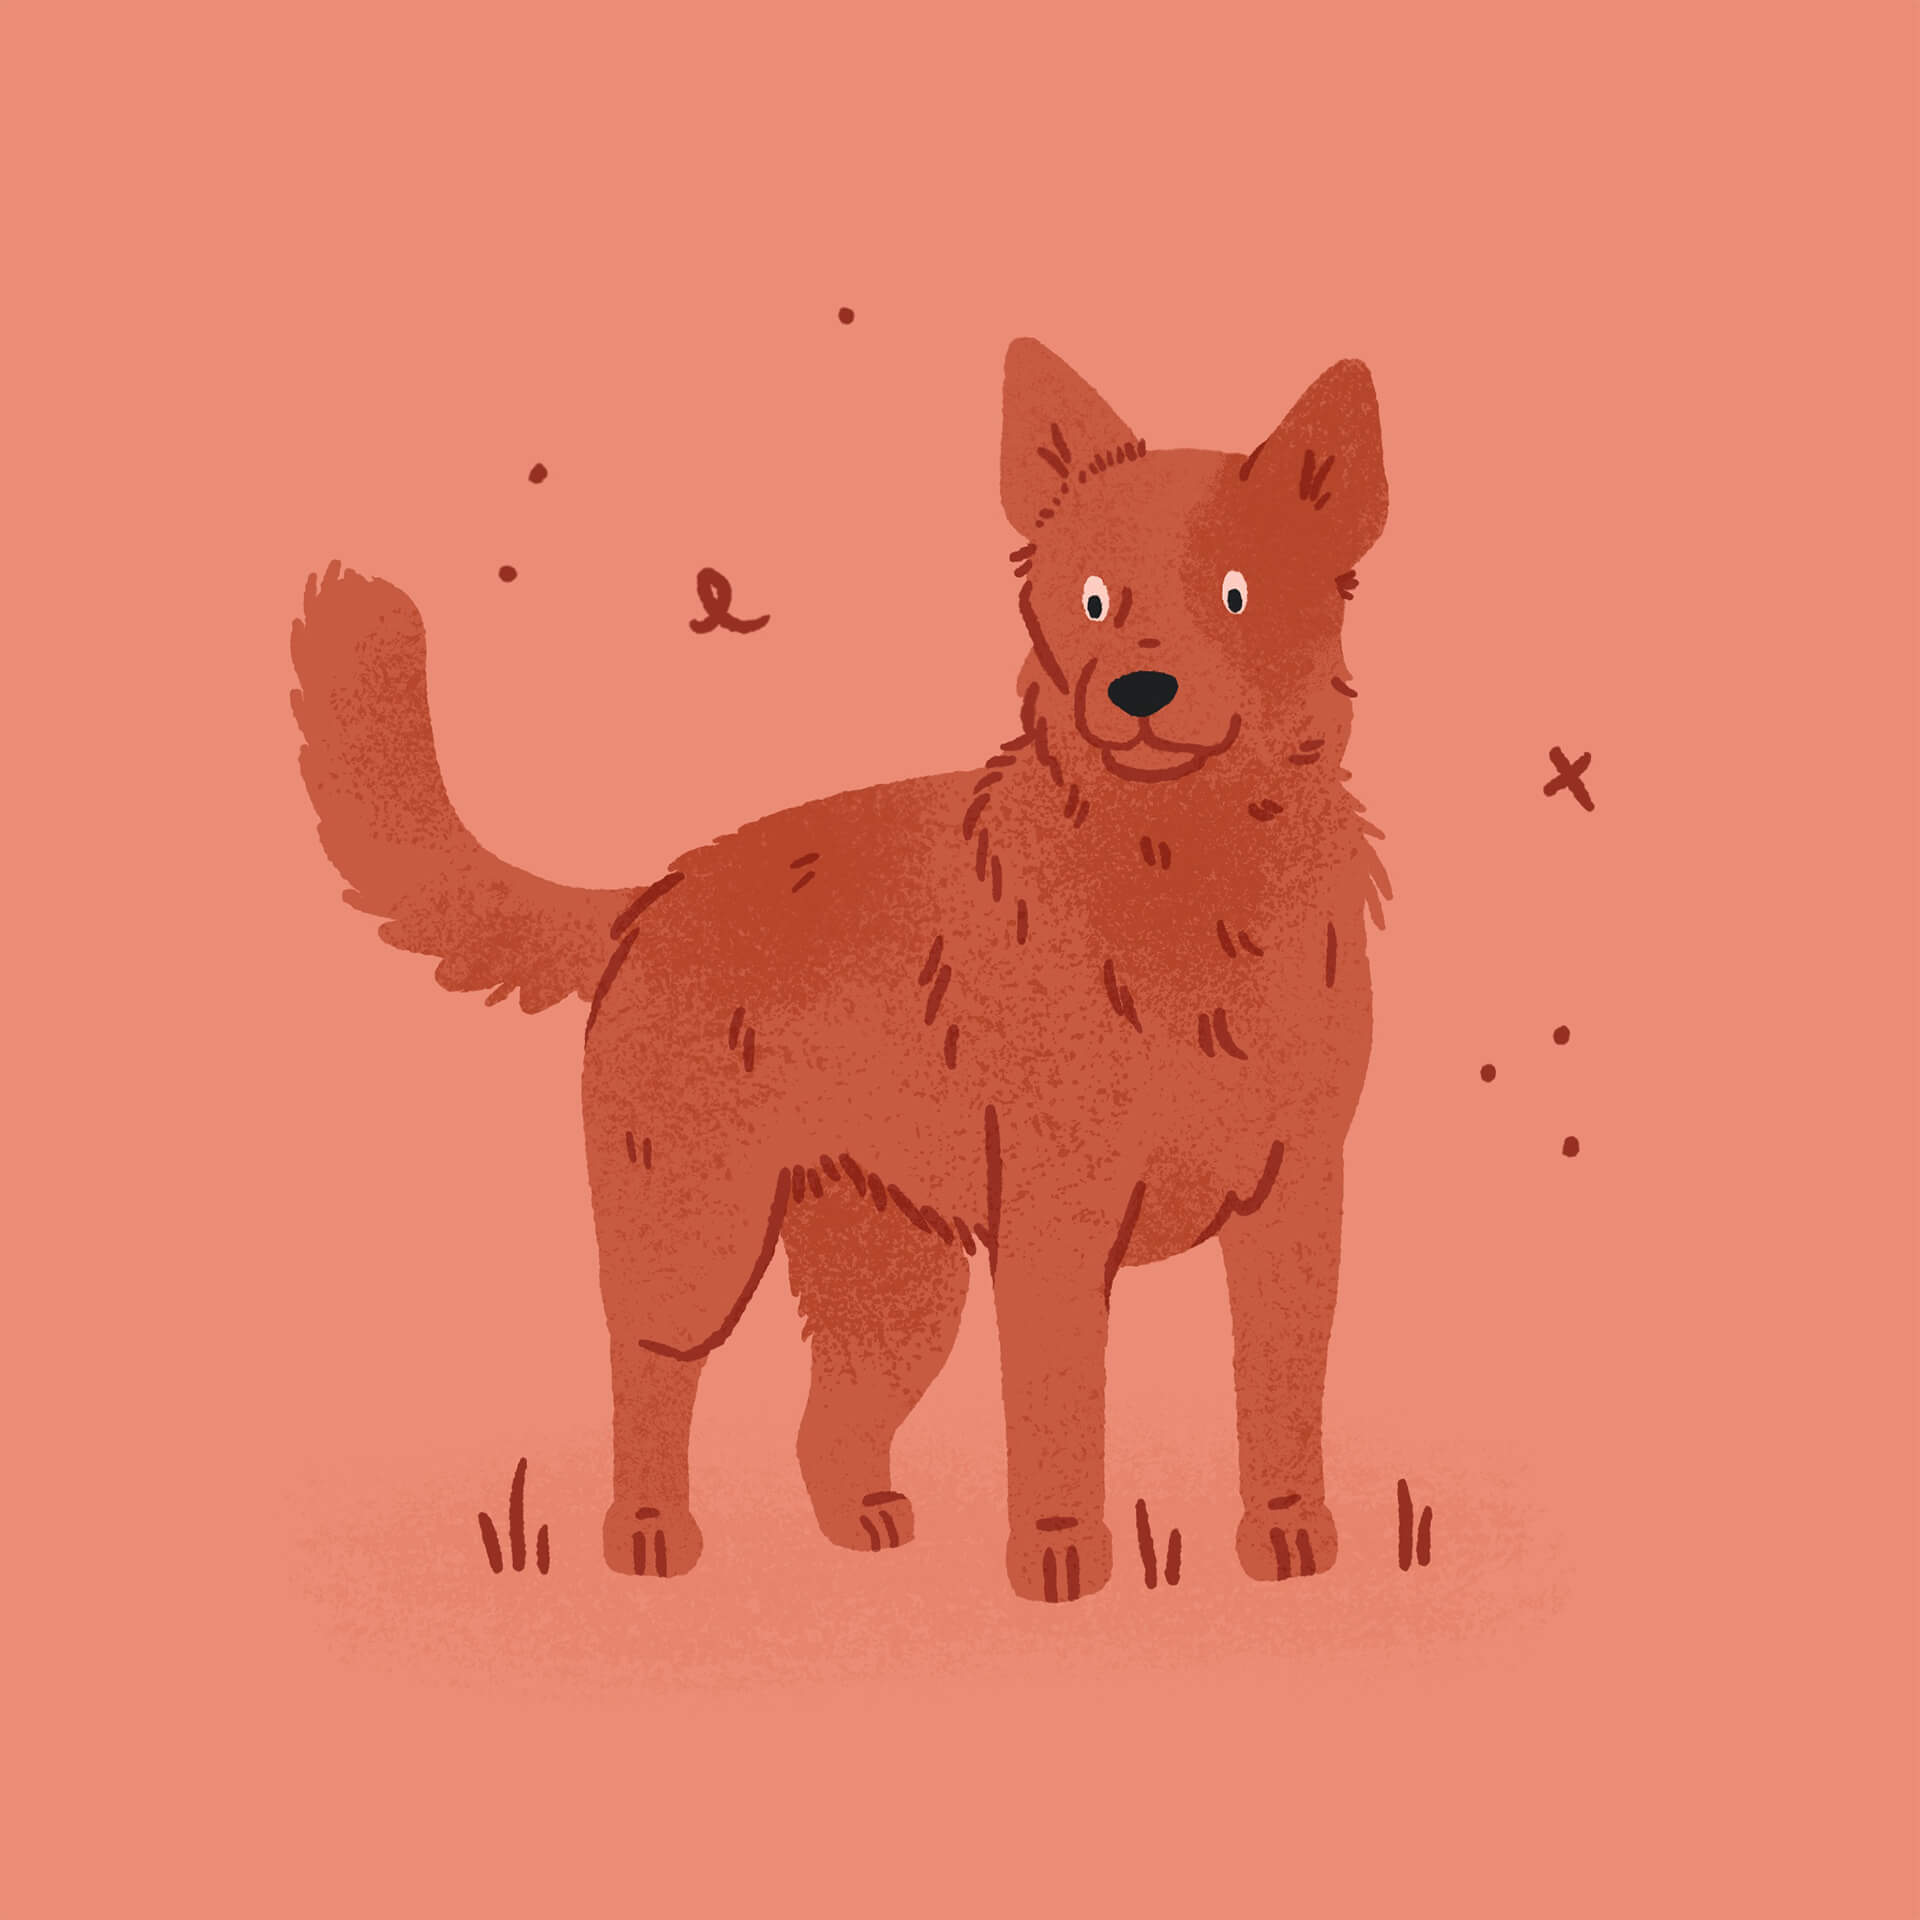 An illustration of a red australian cattle dog smiling with its tail raised